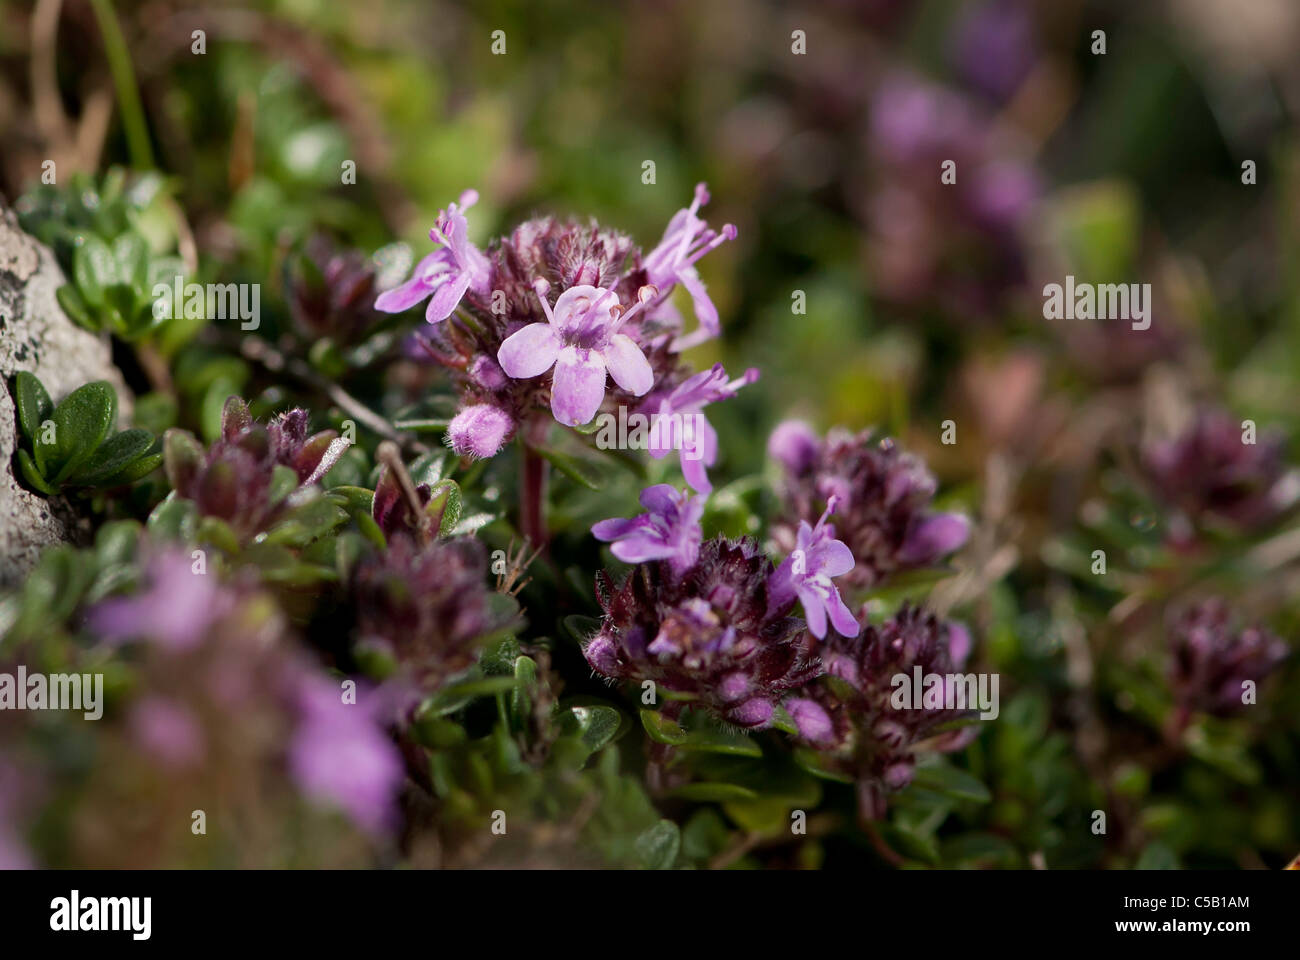 Close up of Thymus praecox flower. also known as wild thyme, creeping thyme or Mother-of-Thyme. Stock Photo